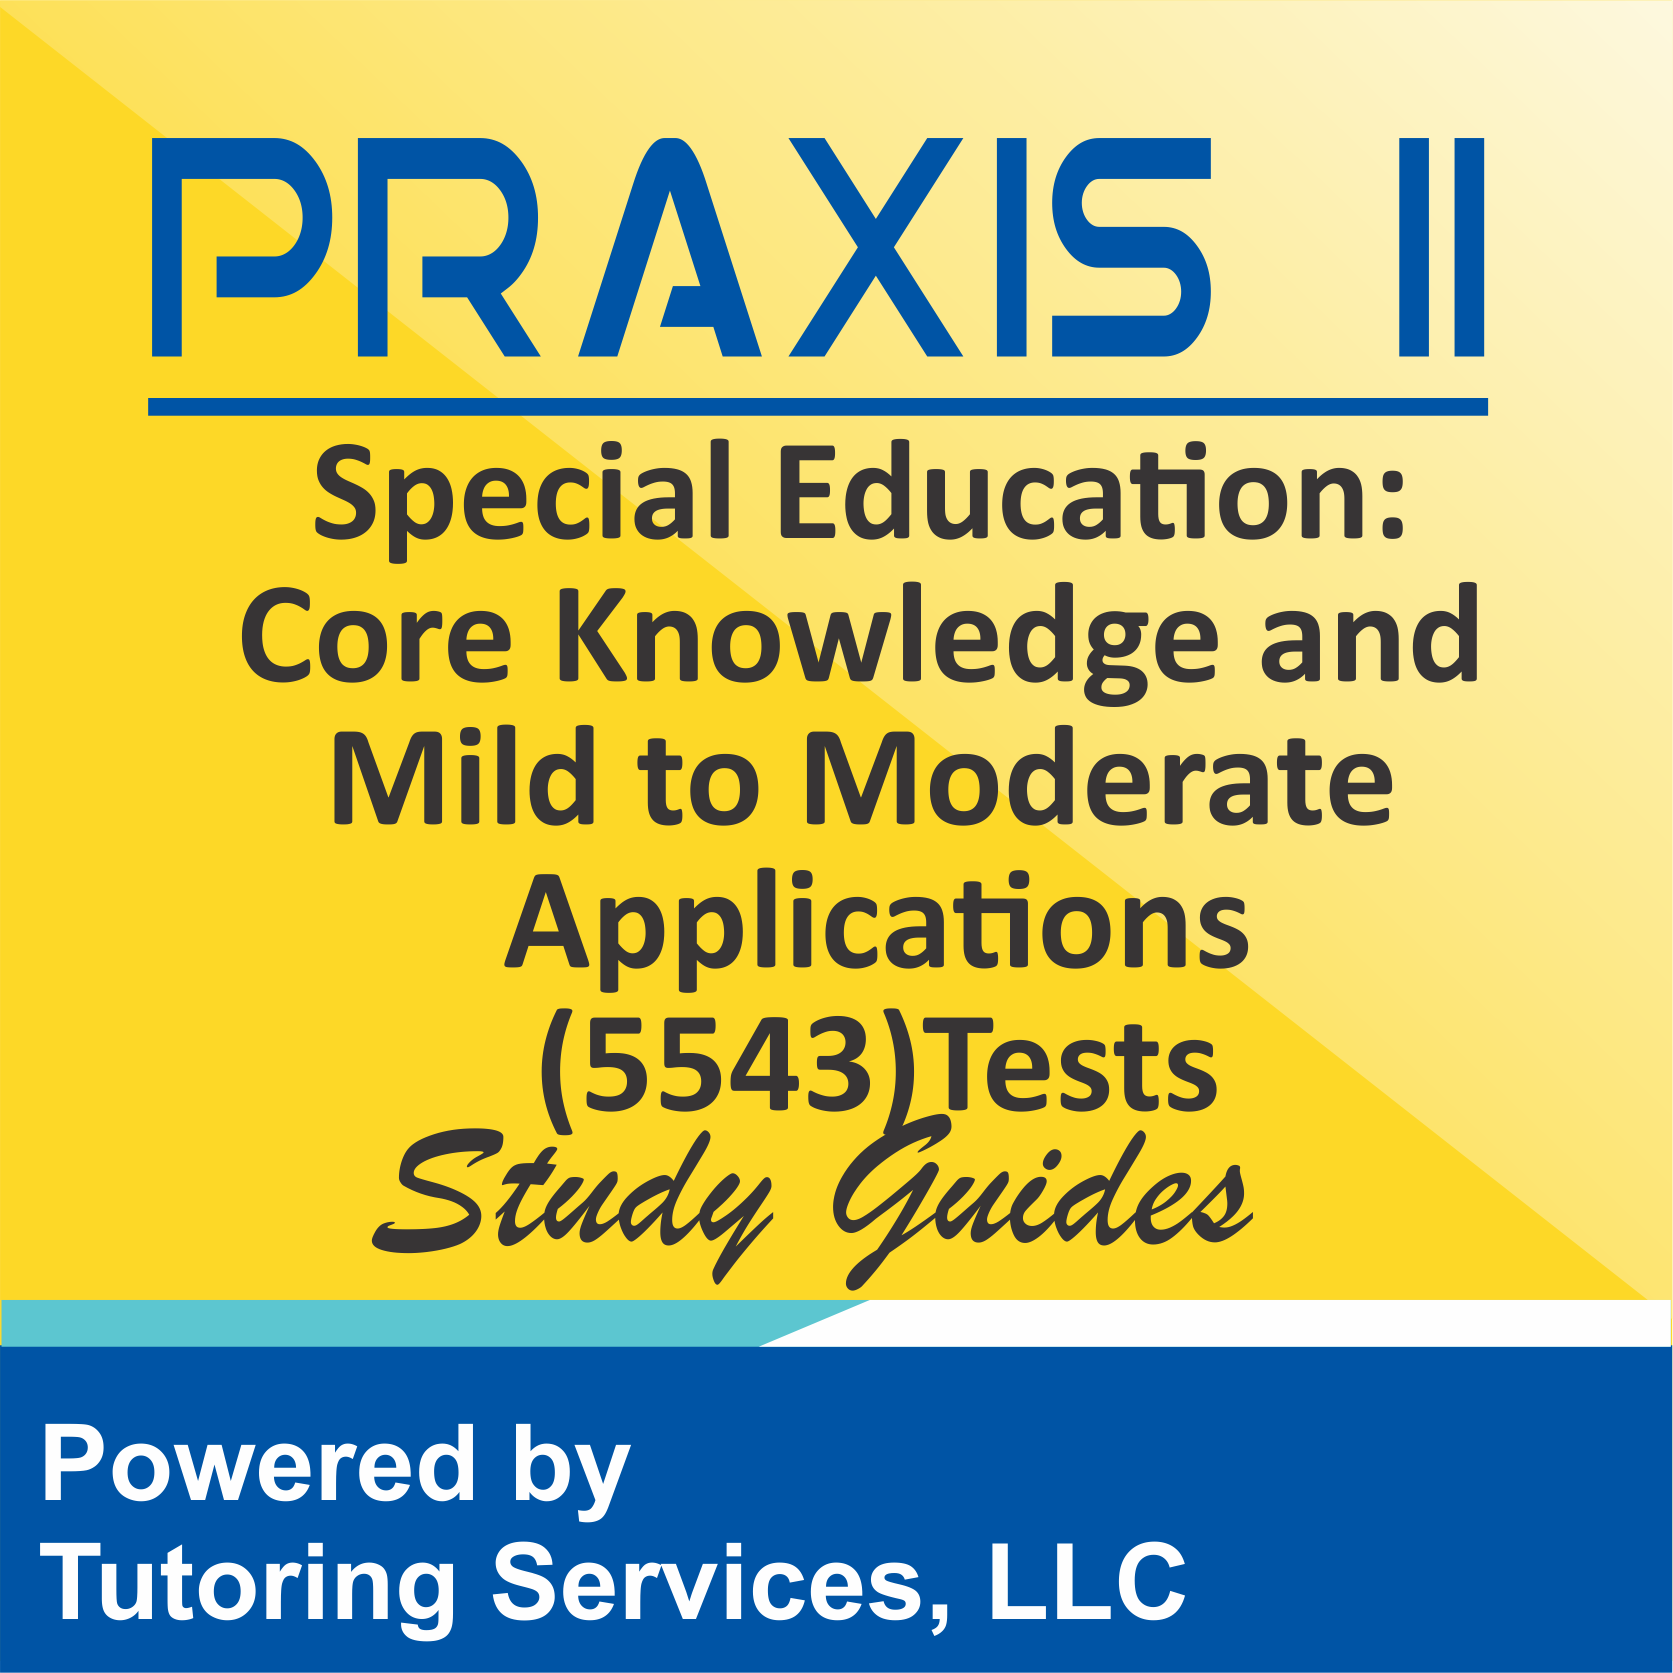 Praxis II Special Education: Core Knowledge and Mild to Moderate Applications (5543) Test